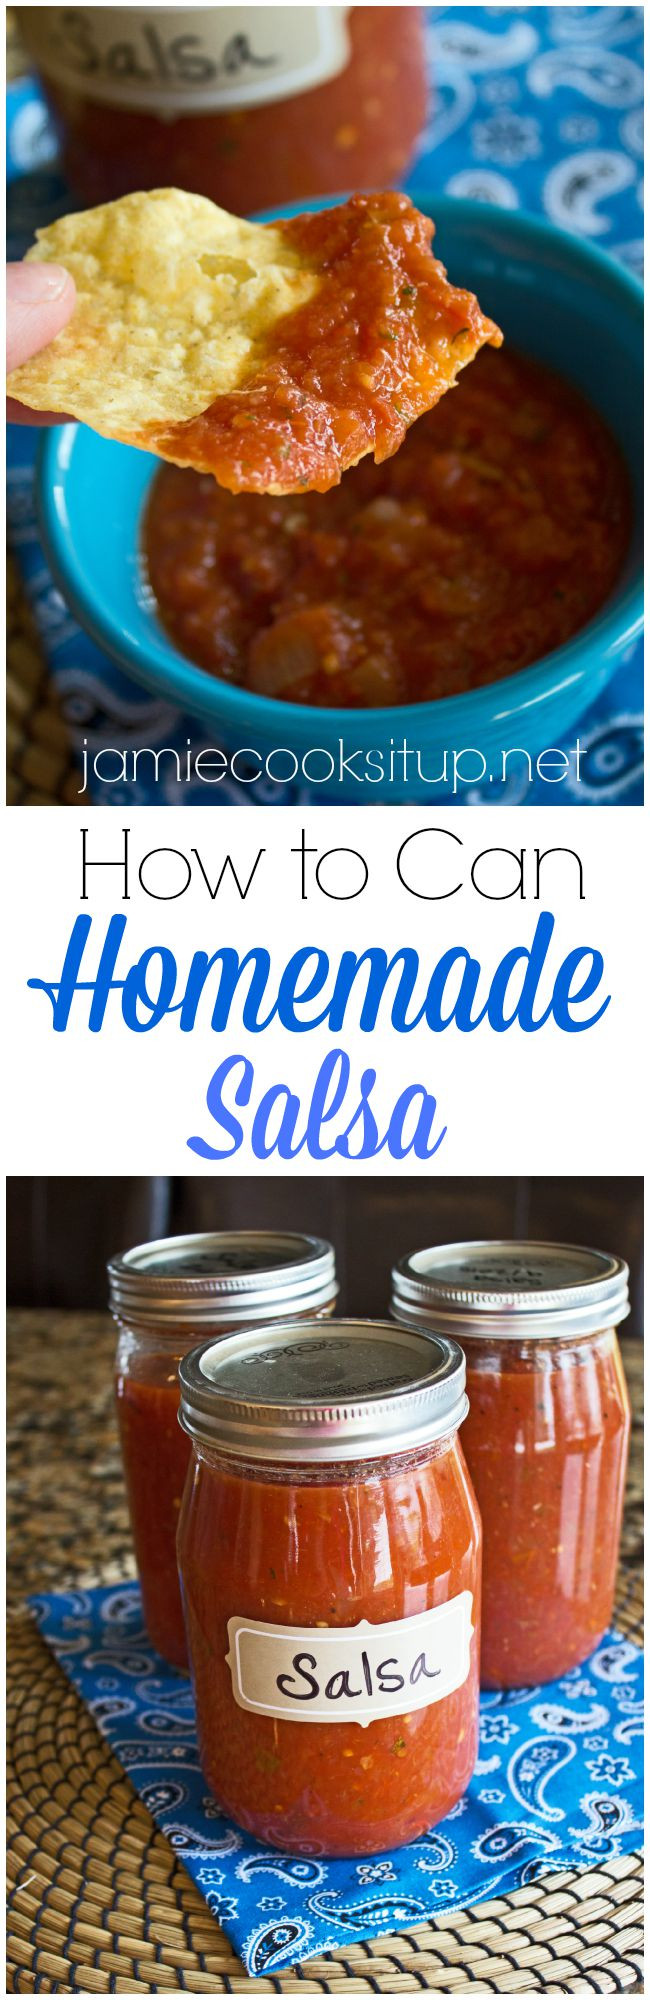 Homemade Salsa Recipe For Canning
 How to Can Homemade Salsa